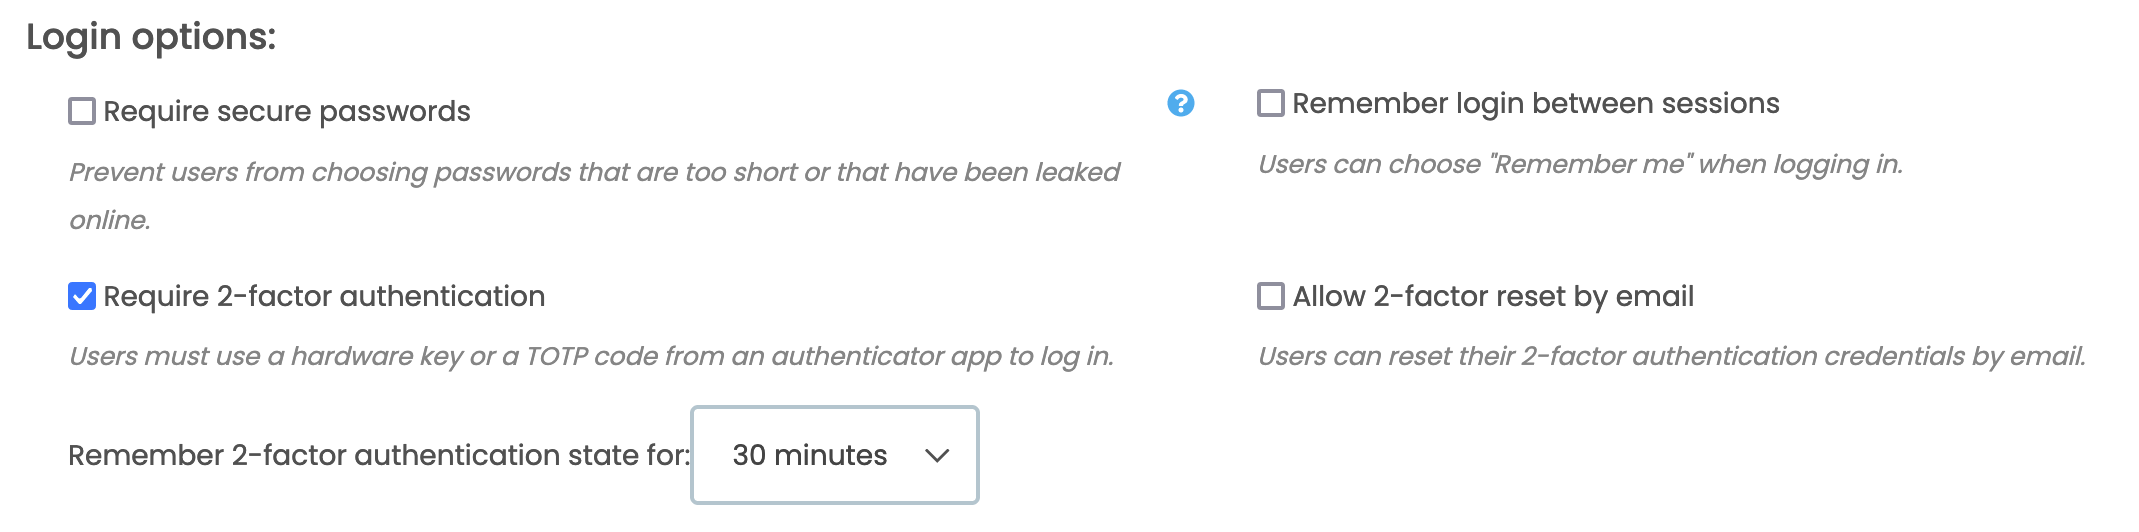 Remember two-factor authentication state